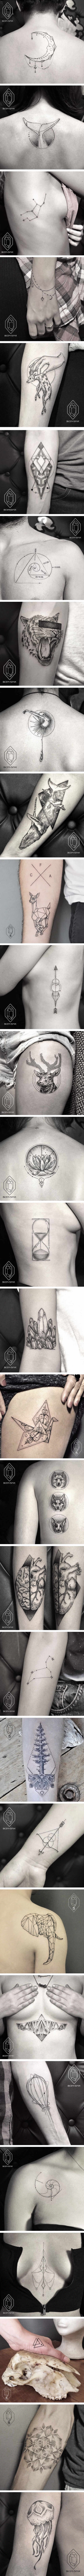 This Artist Creates Geometric Line And Dot Tattoos To Prove Less Is More (Bicem Sinik)